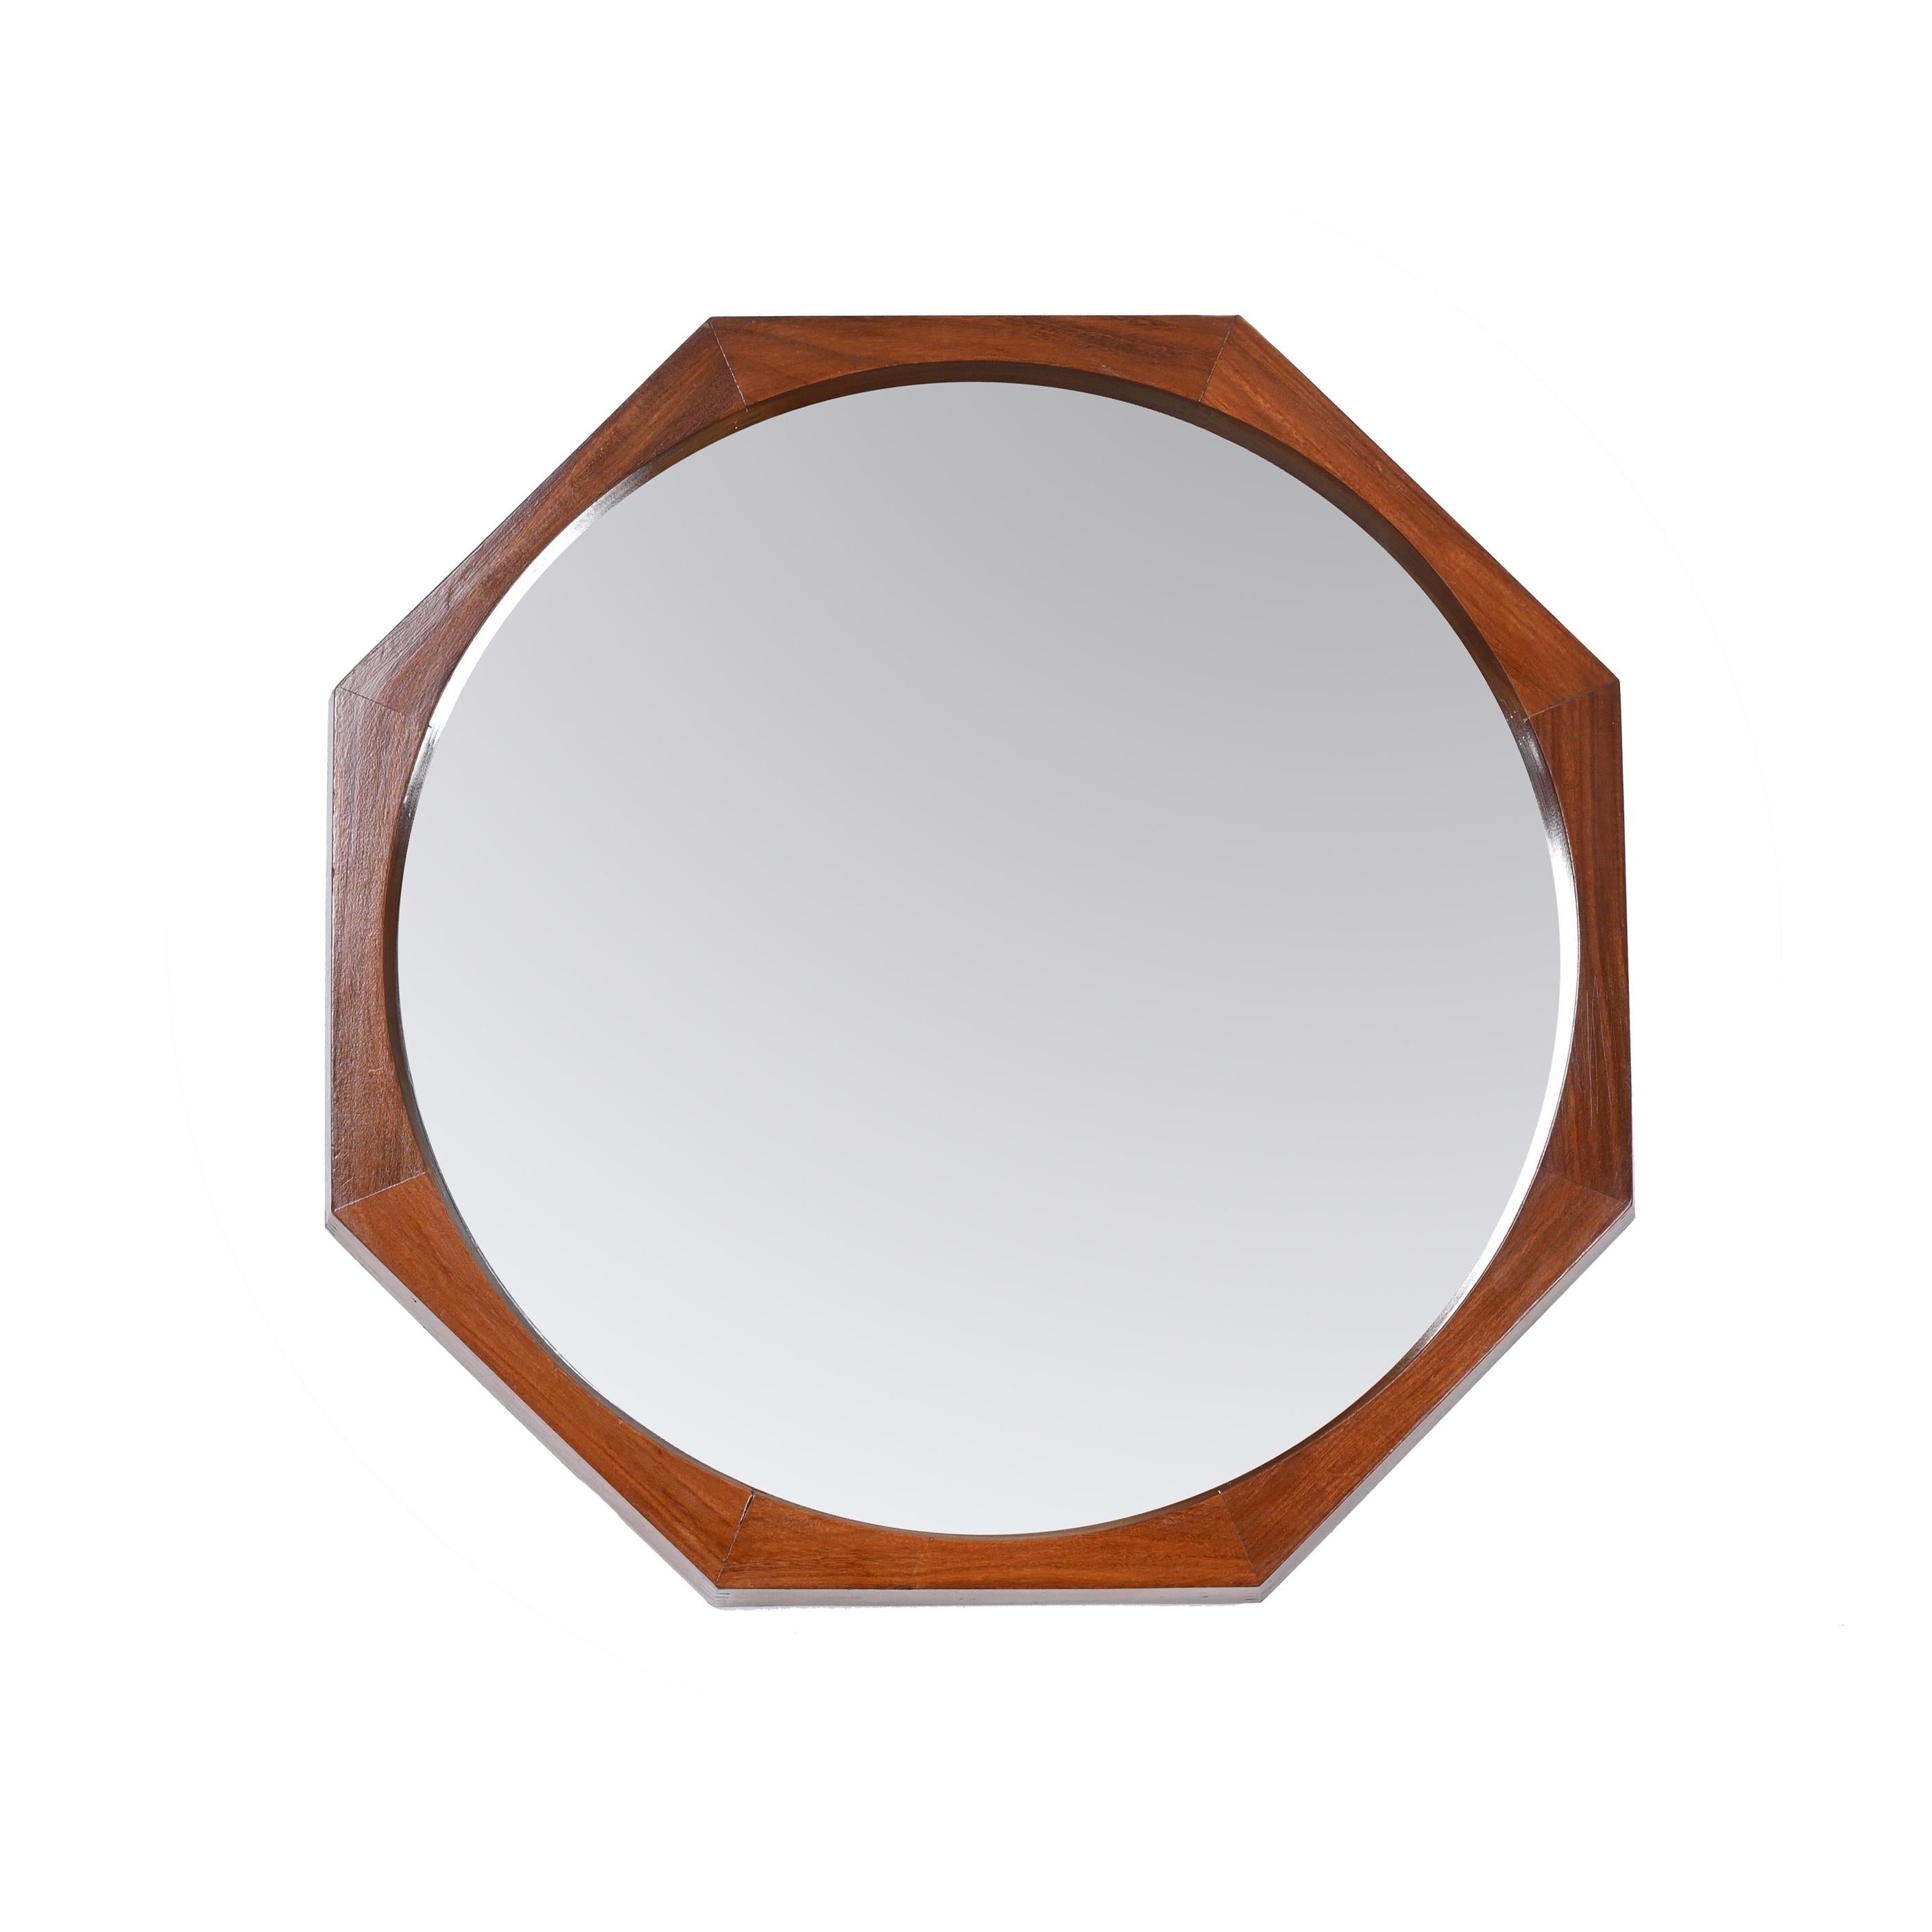 Amazing Mid-Century  teak wood octagonal wall mirror. This fantastic piece was designed by Franco Campo and Carlo Graffi in Italy in the 1960's.

This wonderful piece features an octagonal frame in teak wood of outstanding quality with marvellous